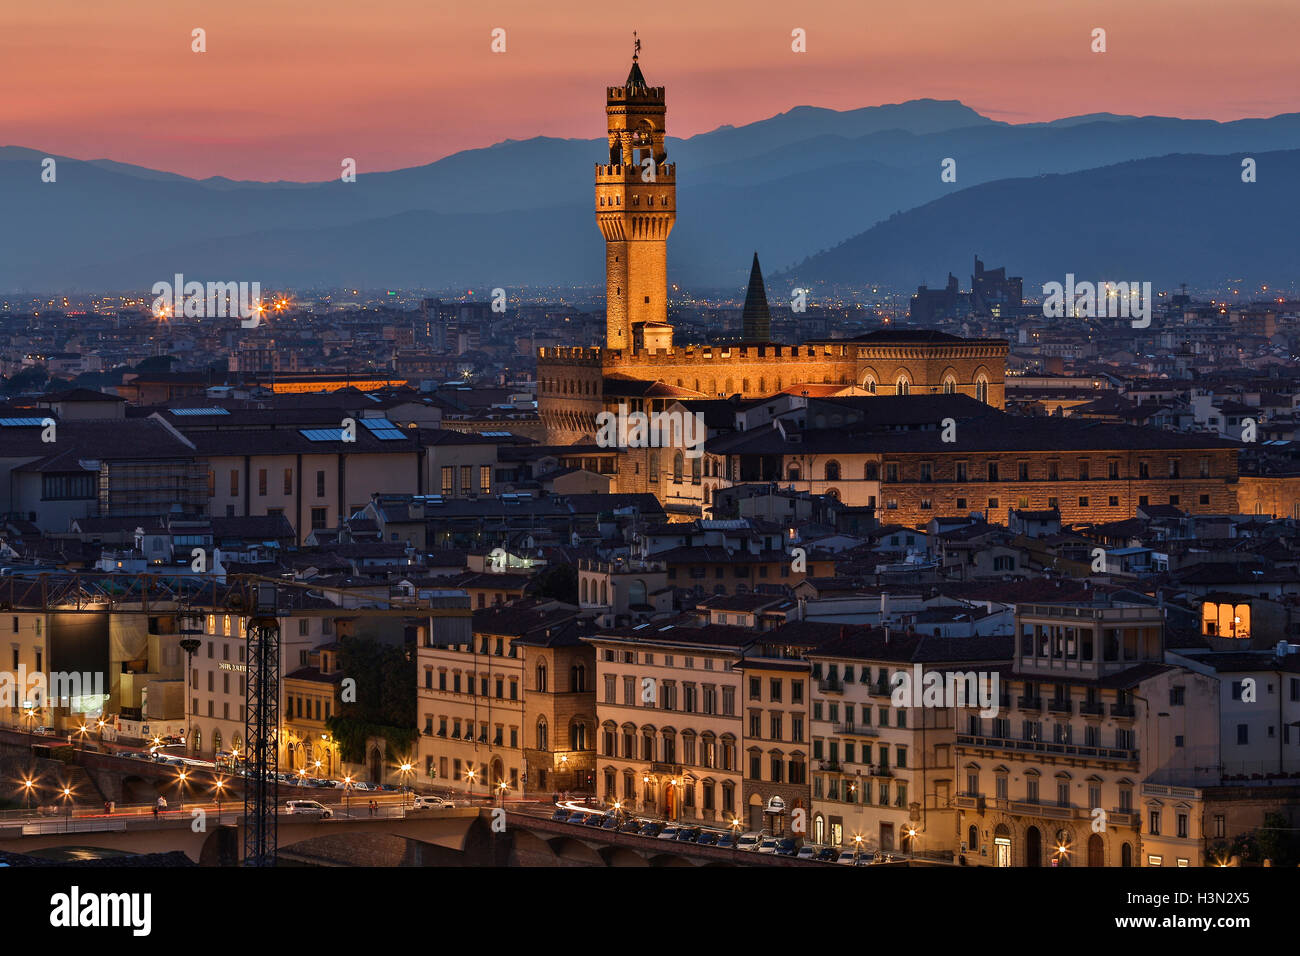 The Palazzo Vecchio and the city of Florence at night - viewed from Piazzale Michelangelo. Stock Photo